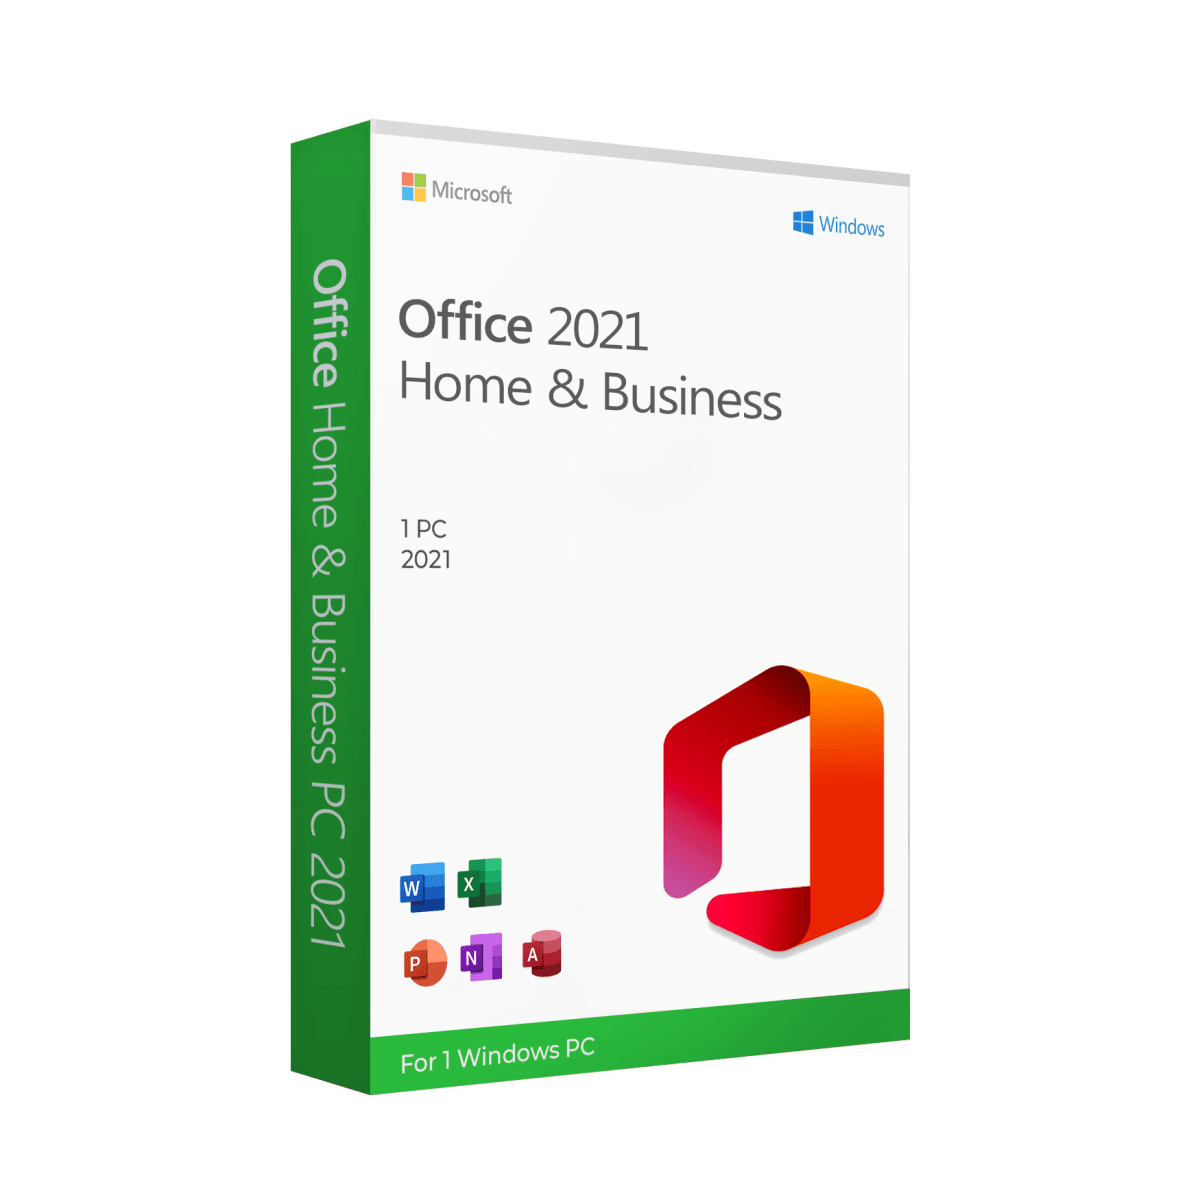 Microsoft Office 2021 Home and Business for Windows PC